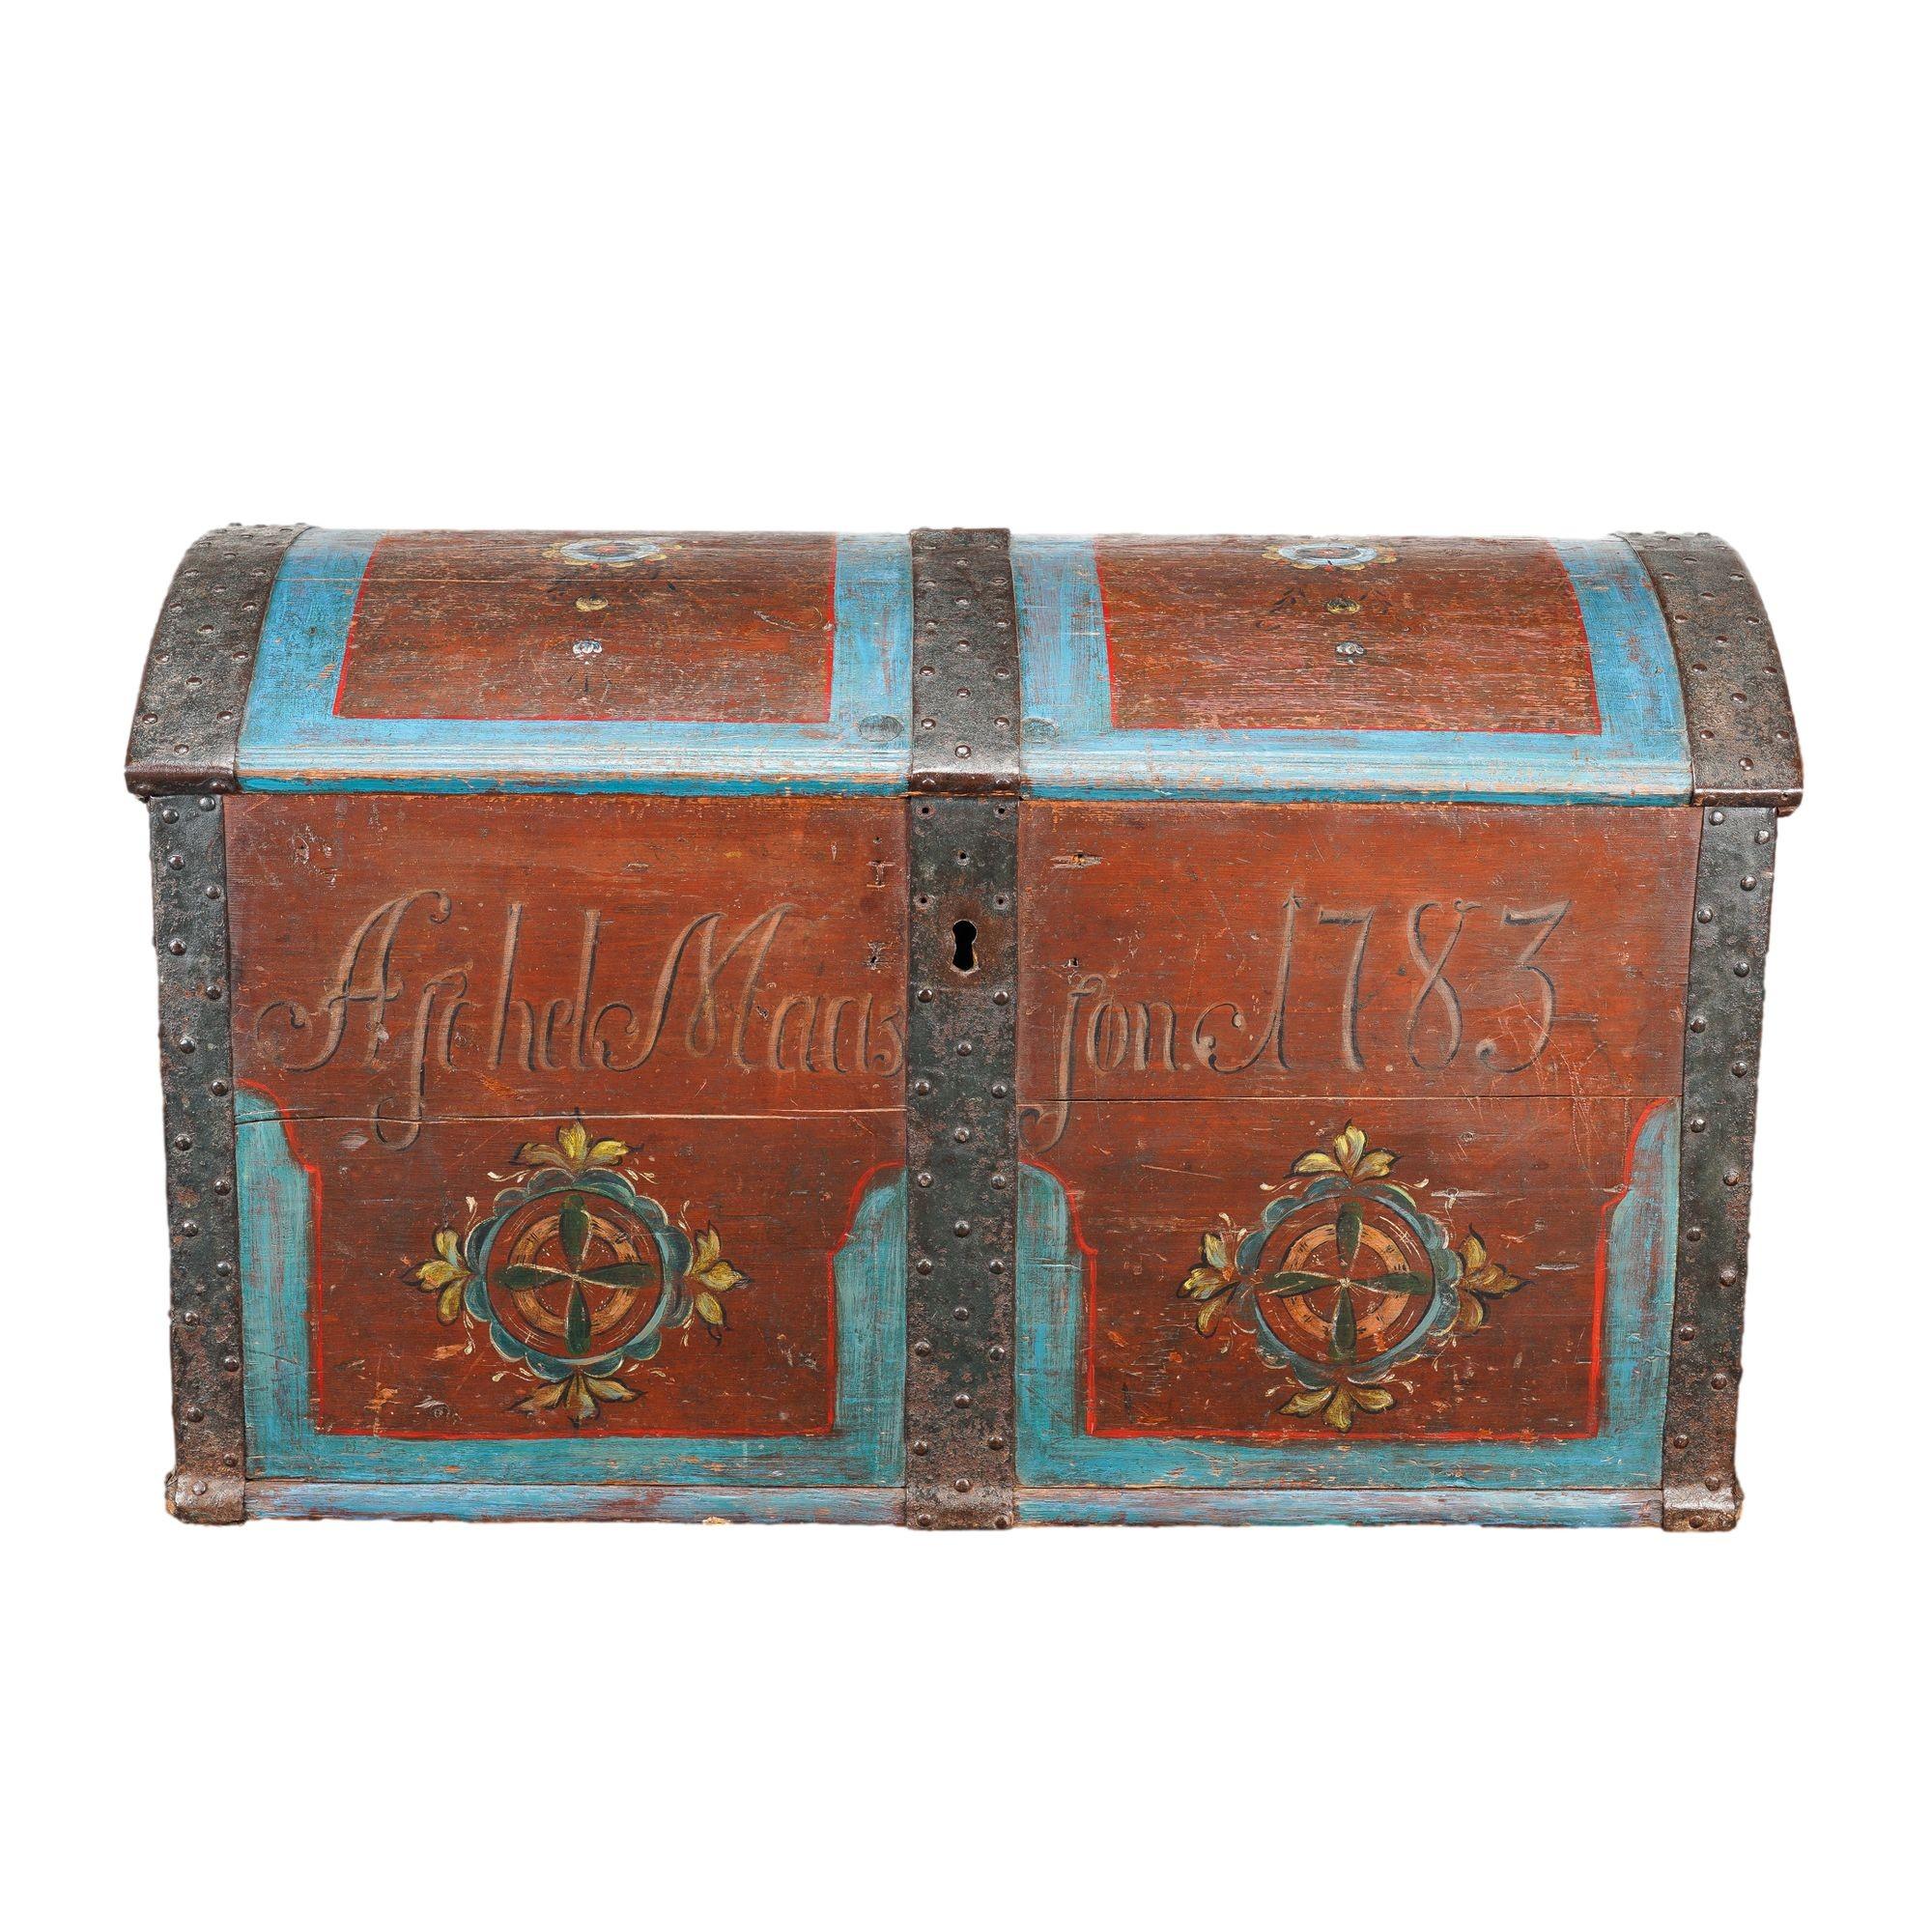 Norwegian painted pine coffer top trunk with original metal strapping and painted decoration. The base color is red with light blue boarder detailing and floral accents throughout.

Norway, 1783.